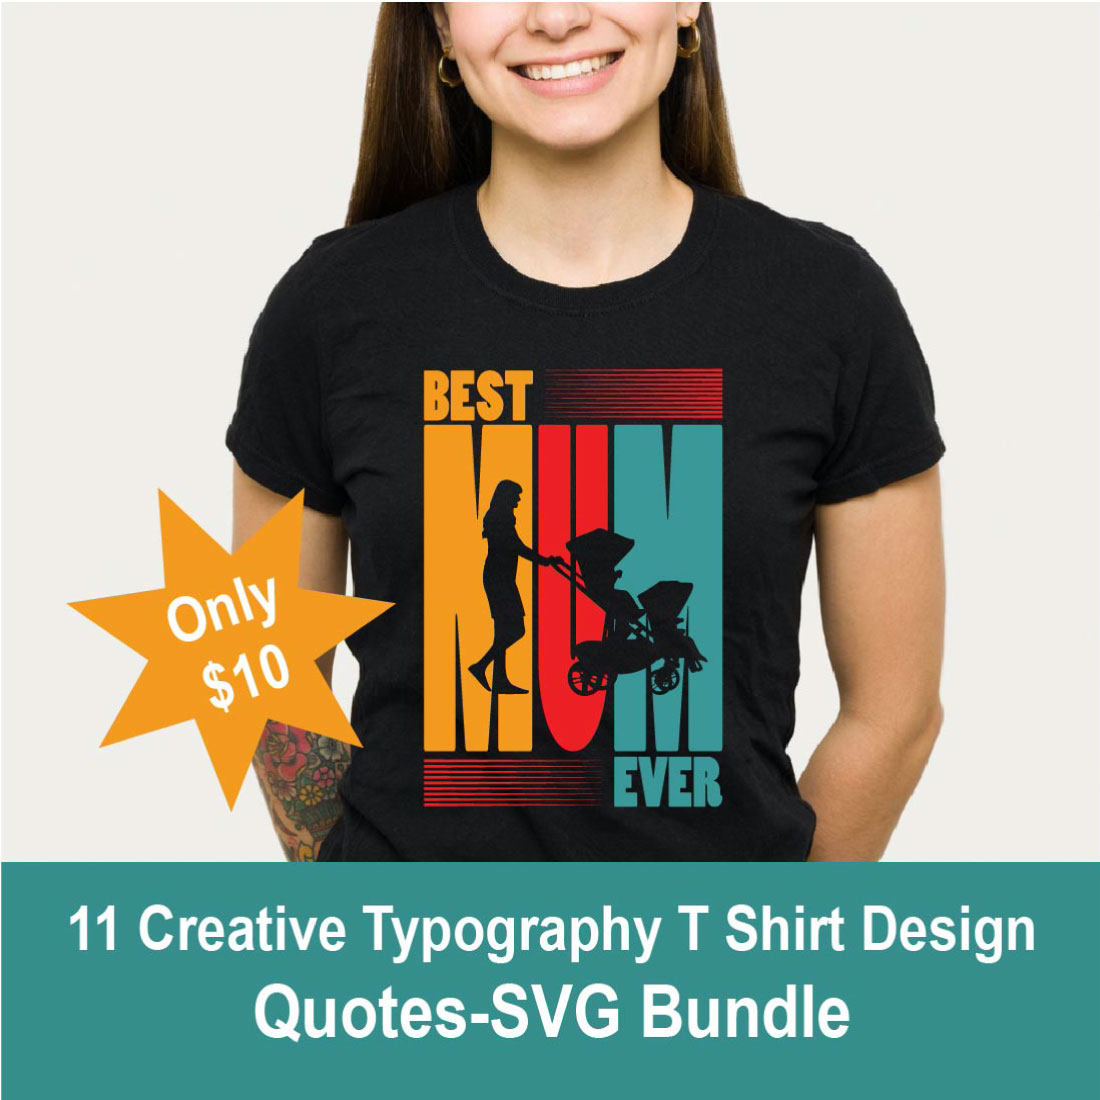 Creative Typography T-Shirt Design Quotes cover image.